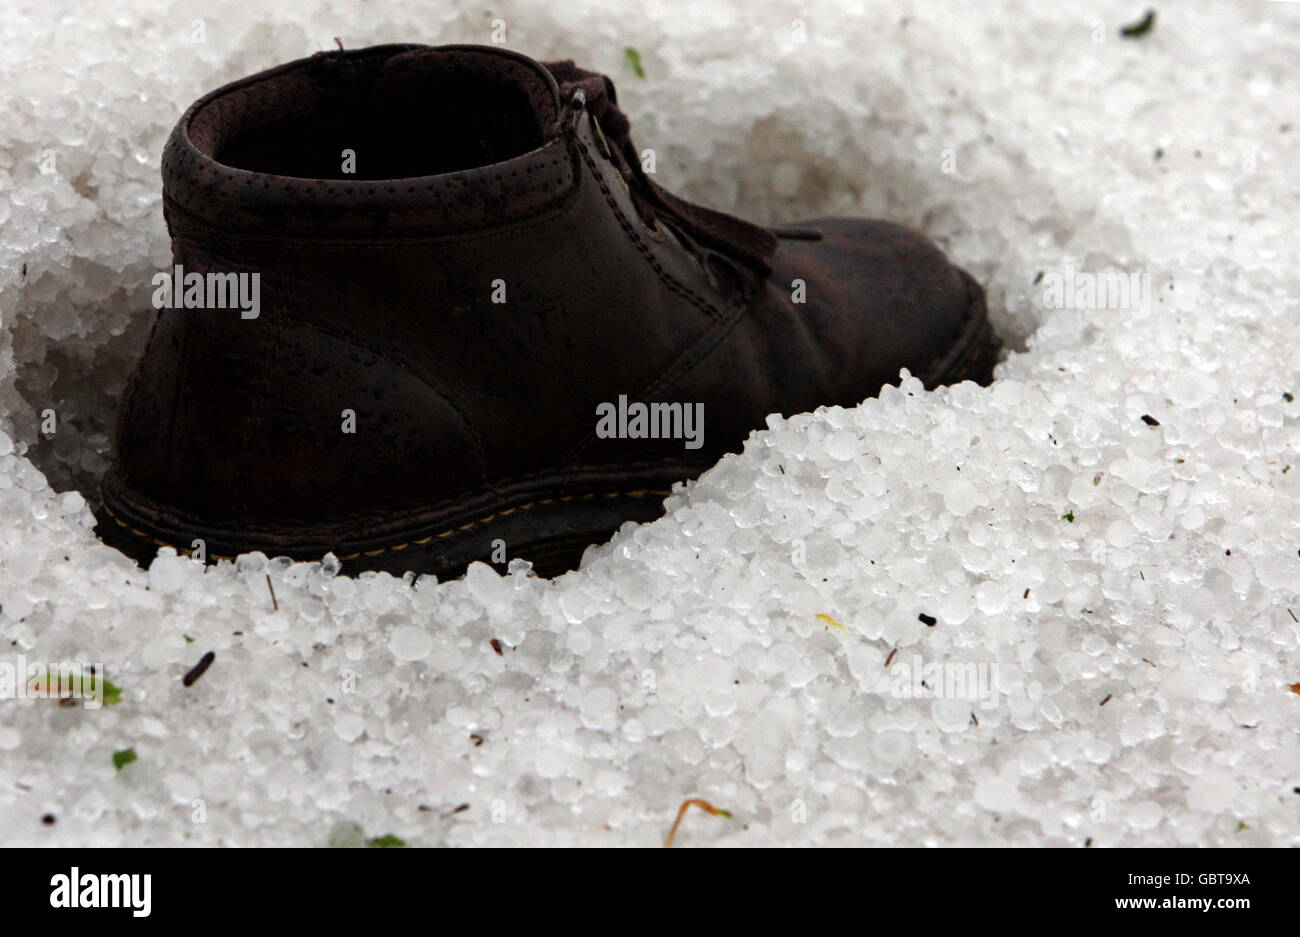 A Dr Martin Boot rests in hail stones following a storm at Watton, Norfolk. Stock Photo